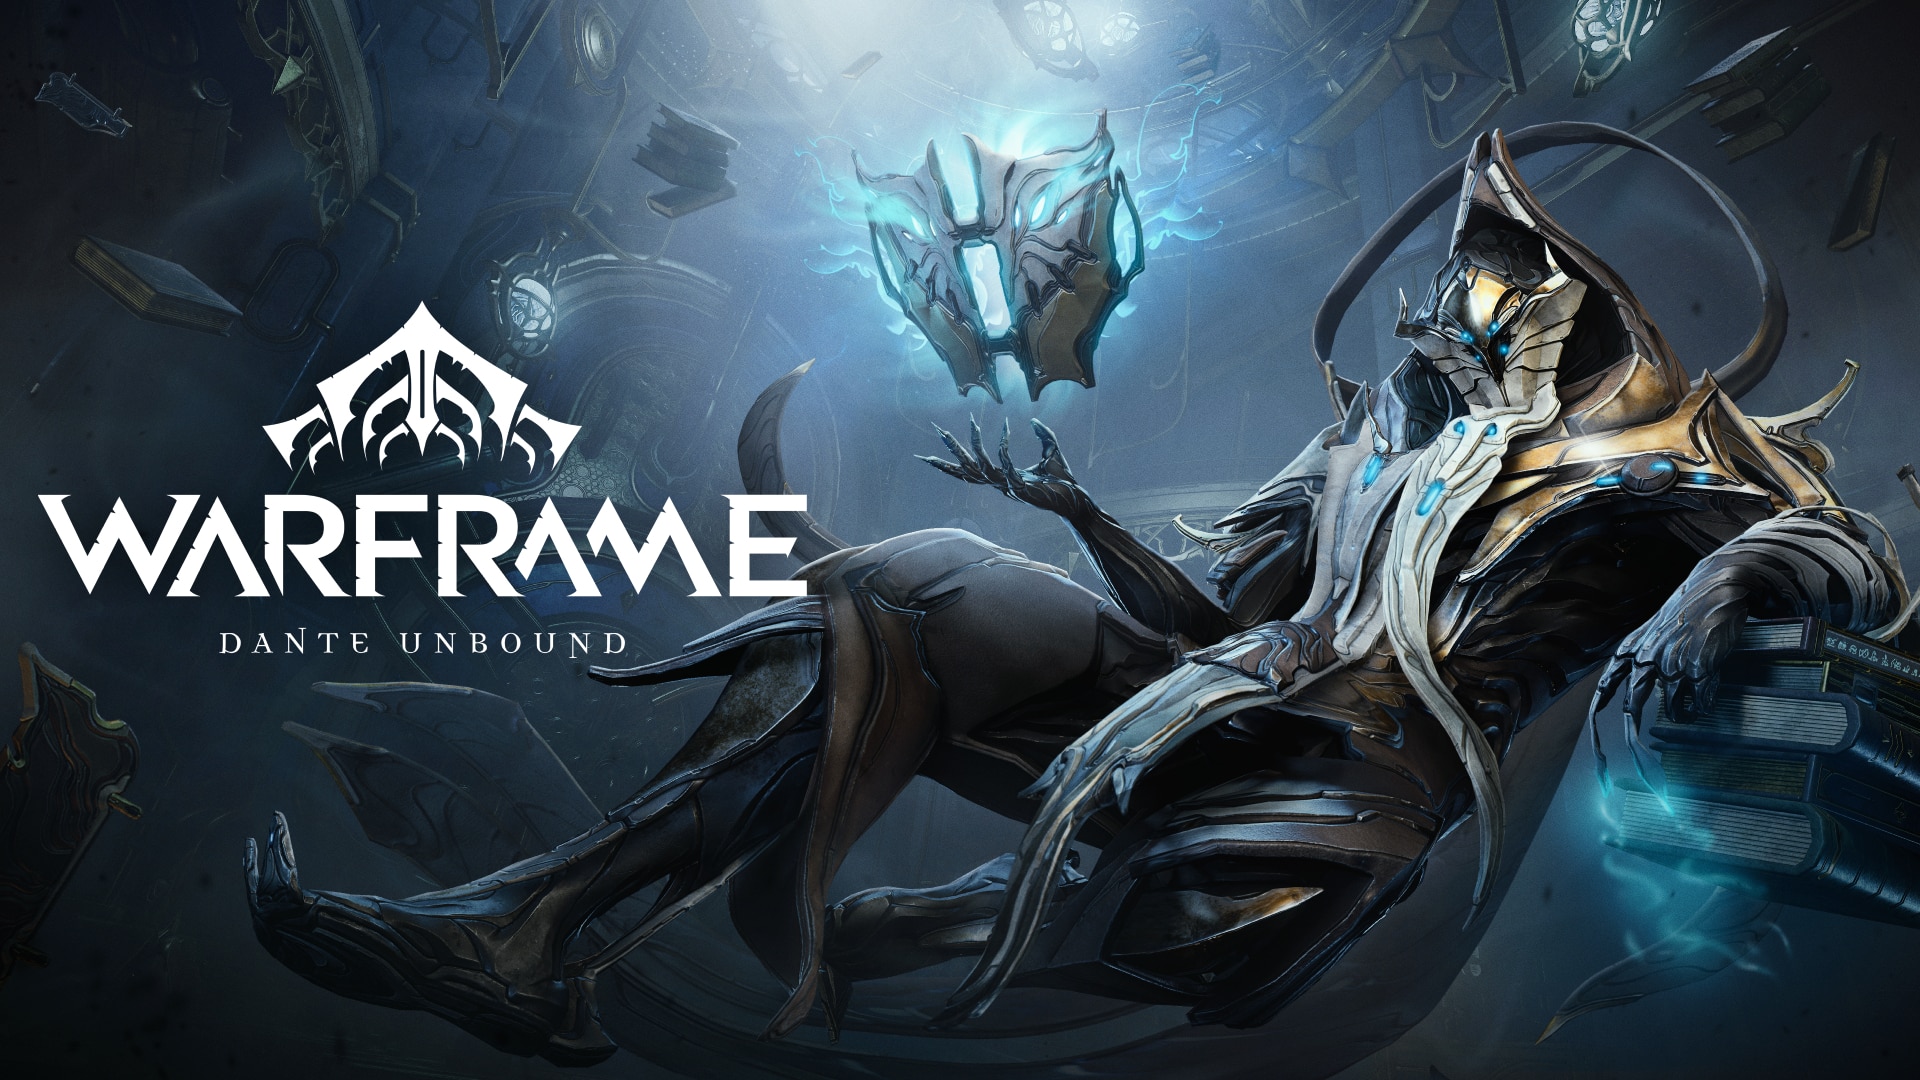 Warframe Update 2.27 Dispatched for Patch 35.5 Dante Unbound This March 27